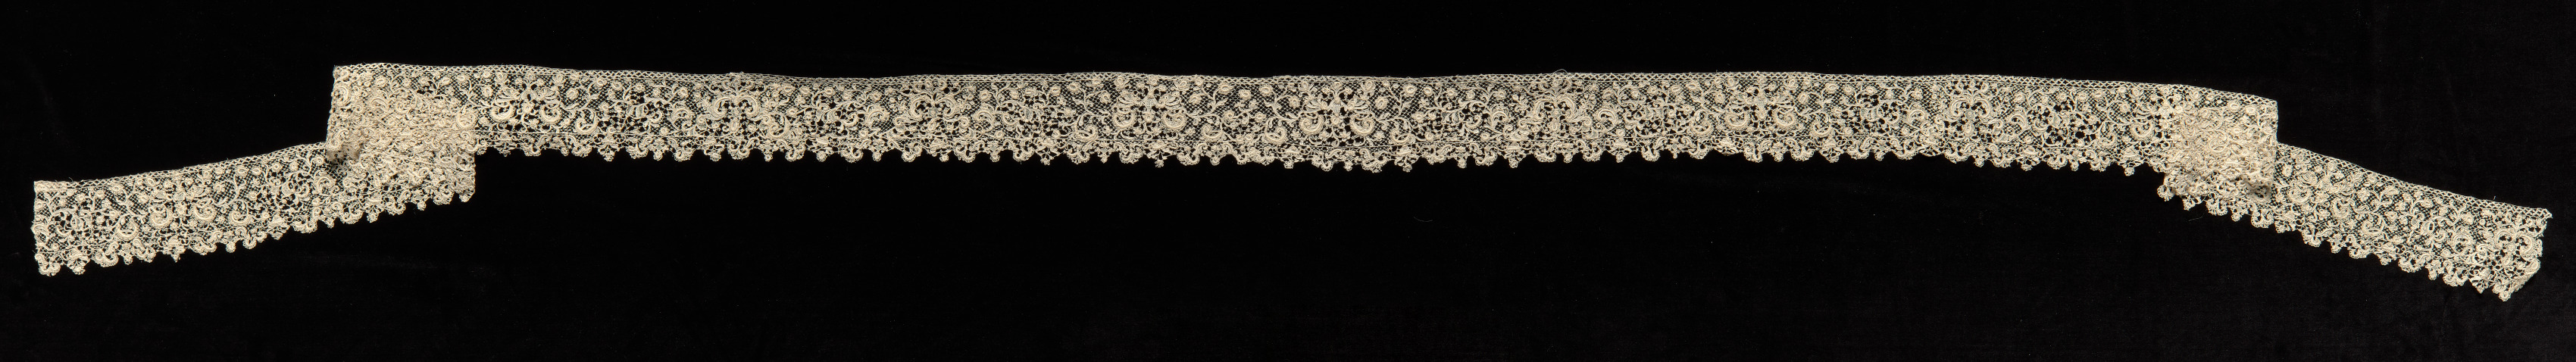 Needlepoint (Venetian Rose Point or variation of) Lace Edging